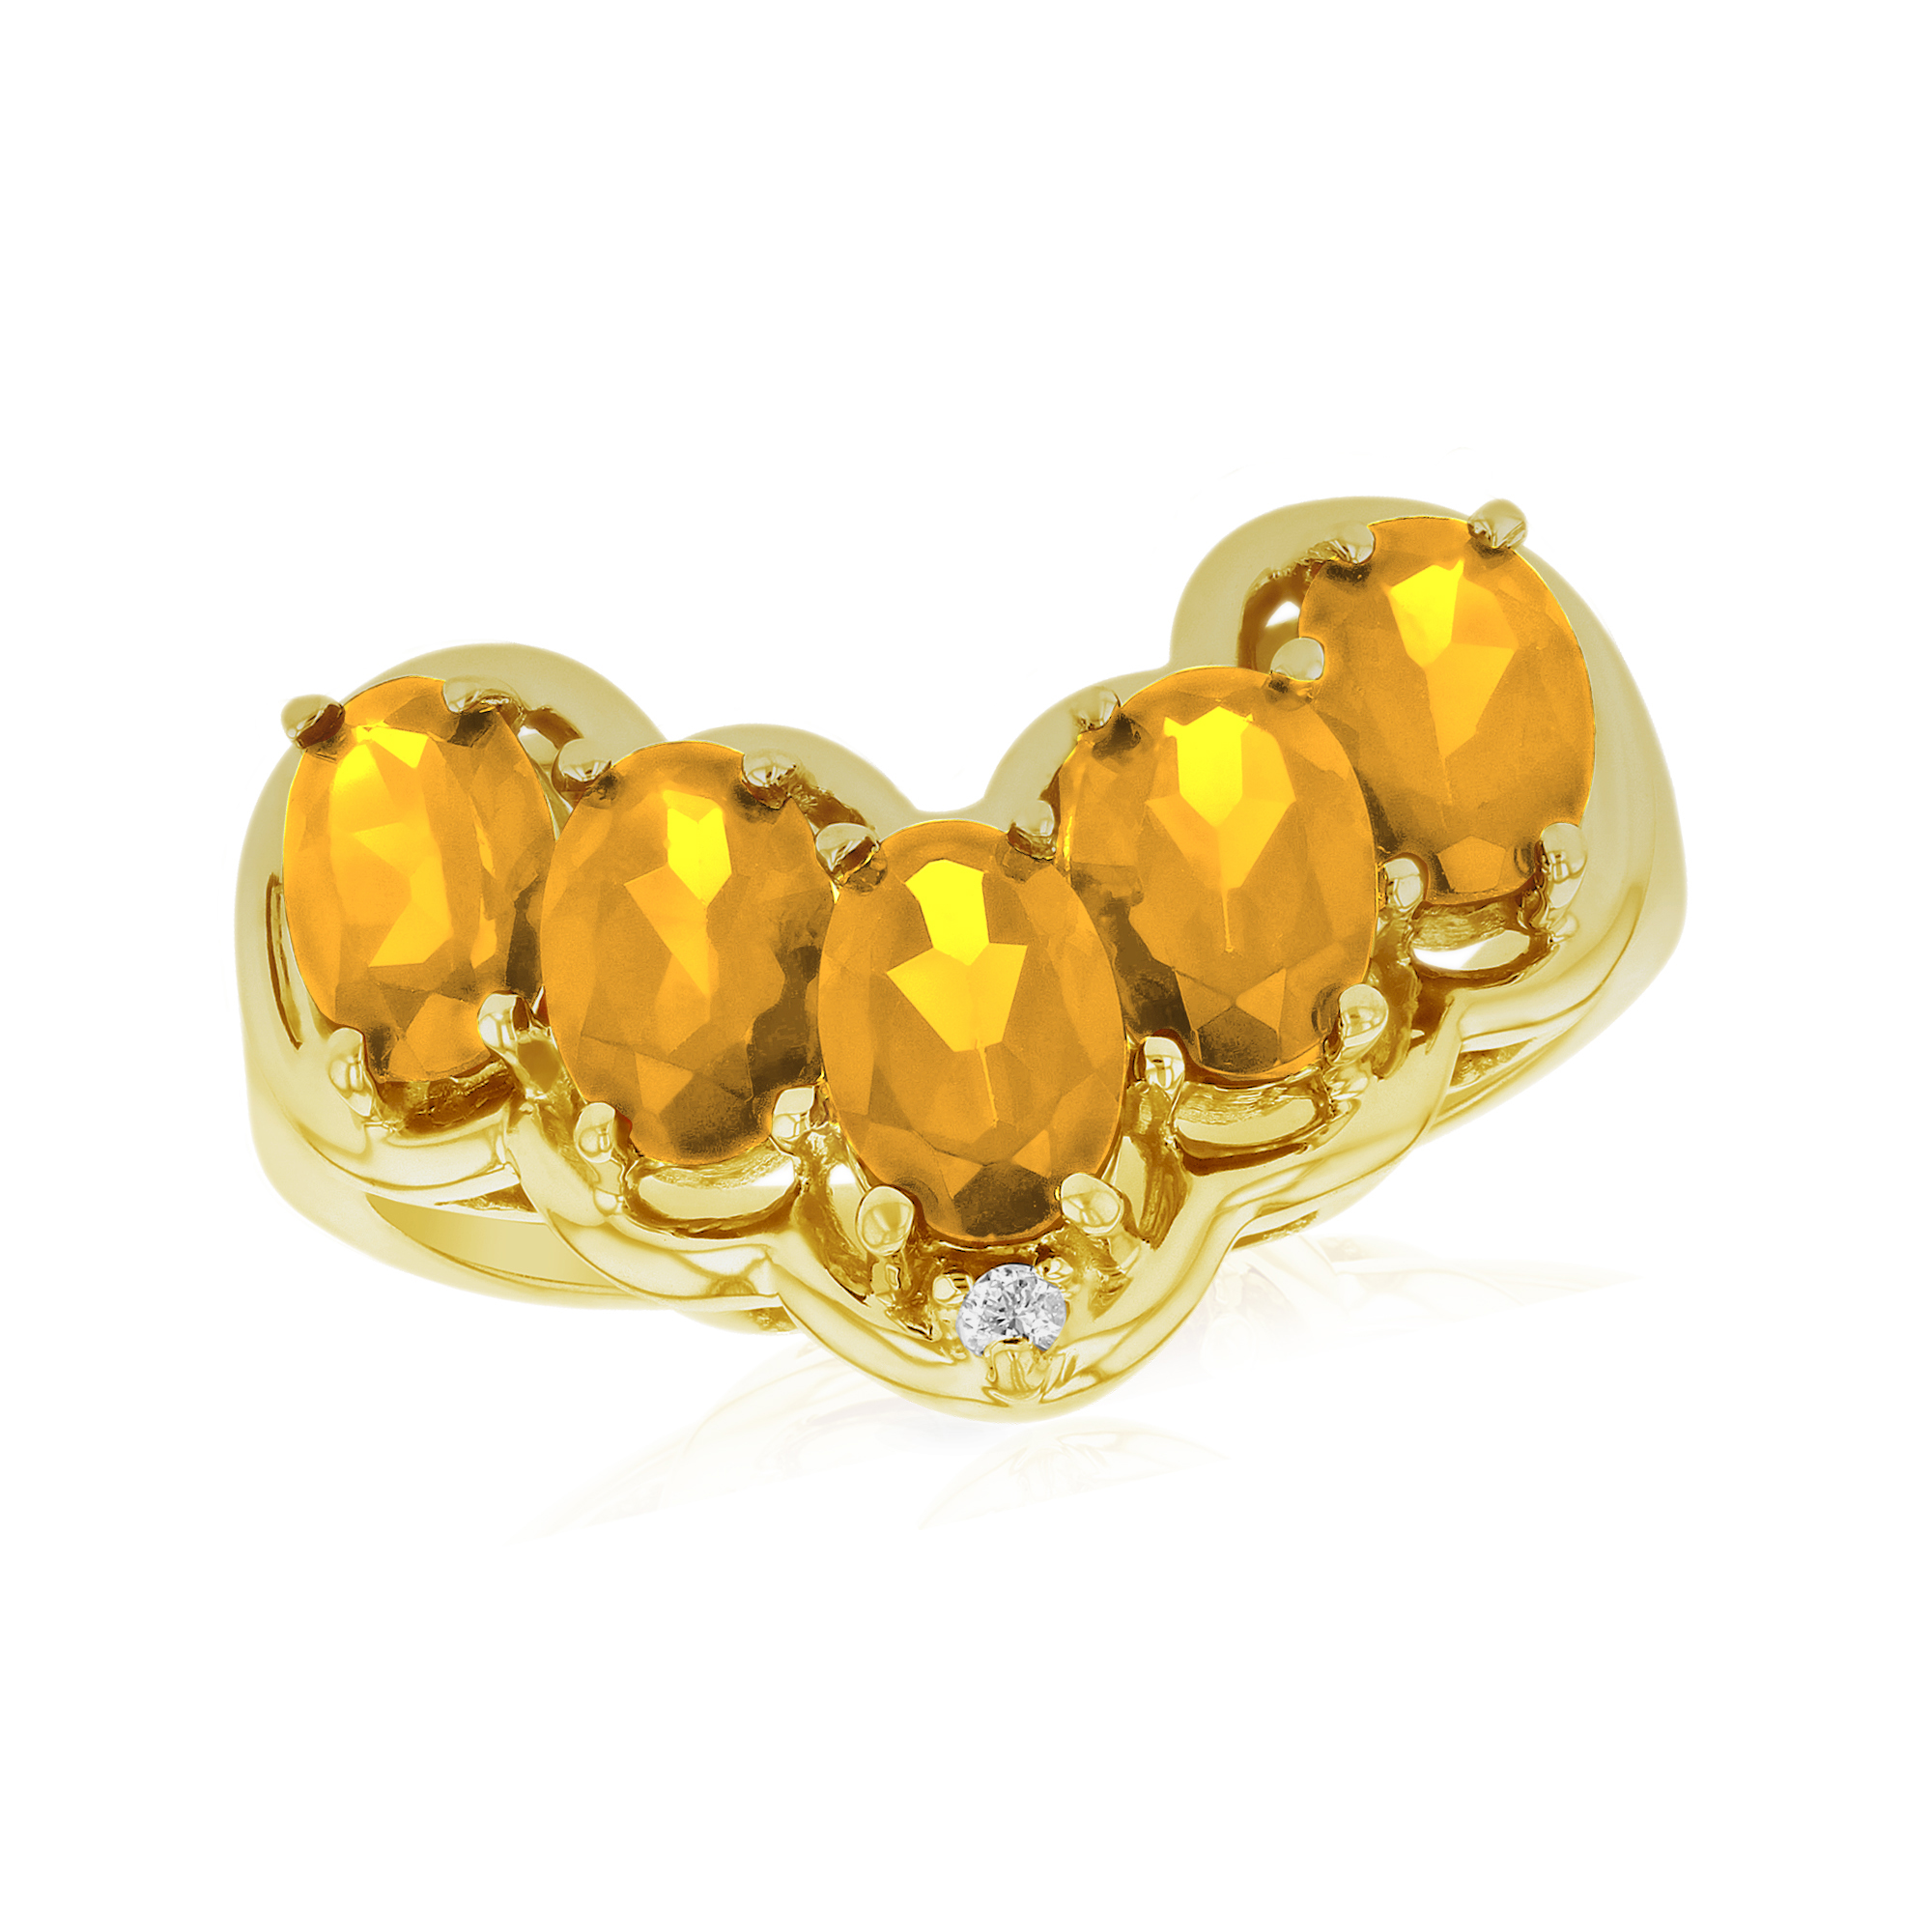 View 0.01ctw Diamond and Citrine Fashion ring in 14k Yellow Gold